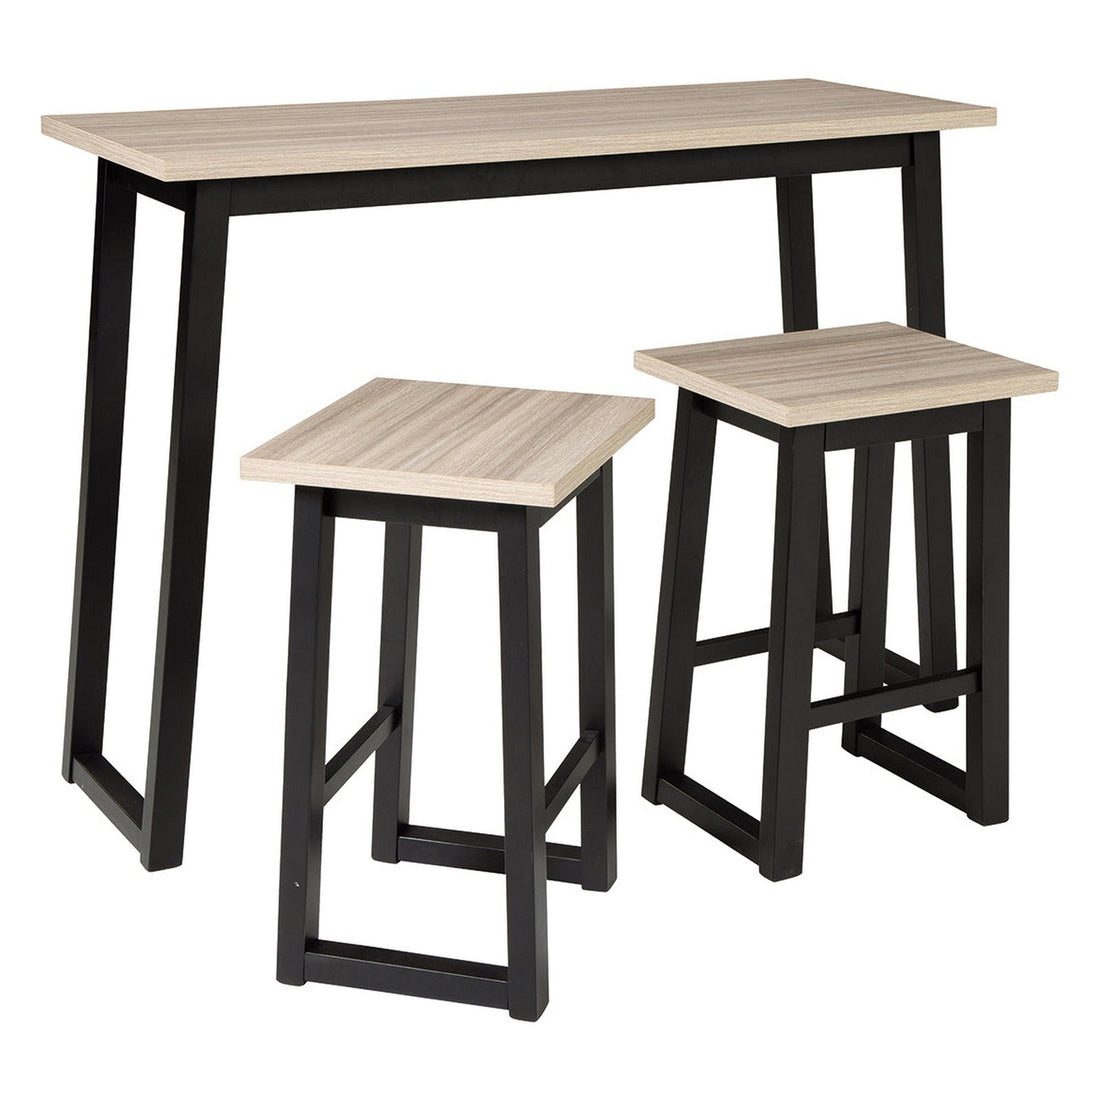 Waylowe Counter Height Dining Table and Bar Stools (Set of 3) Ash-D201-113